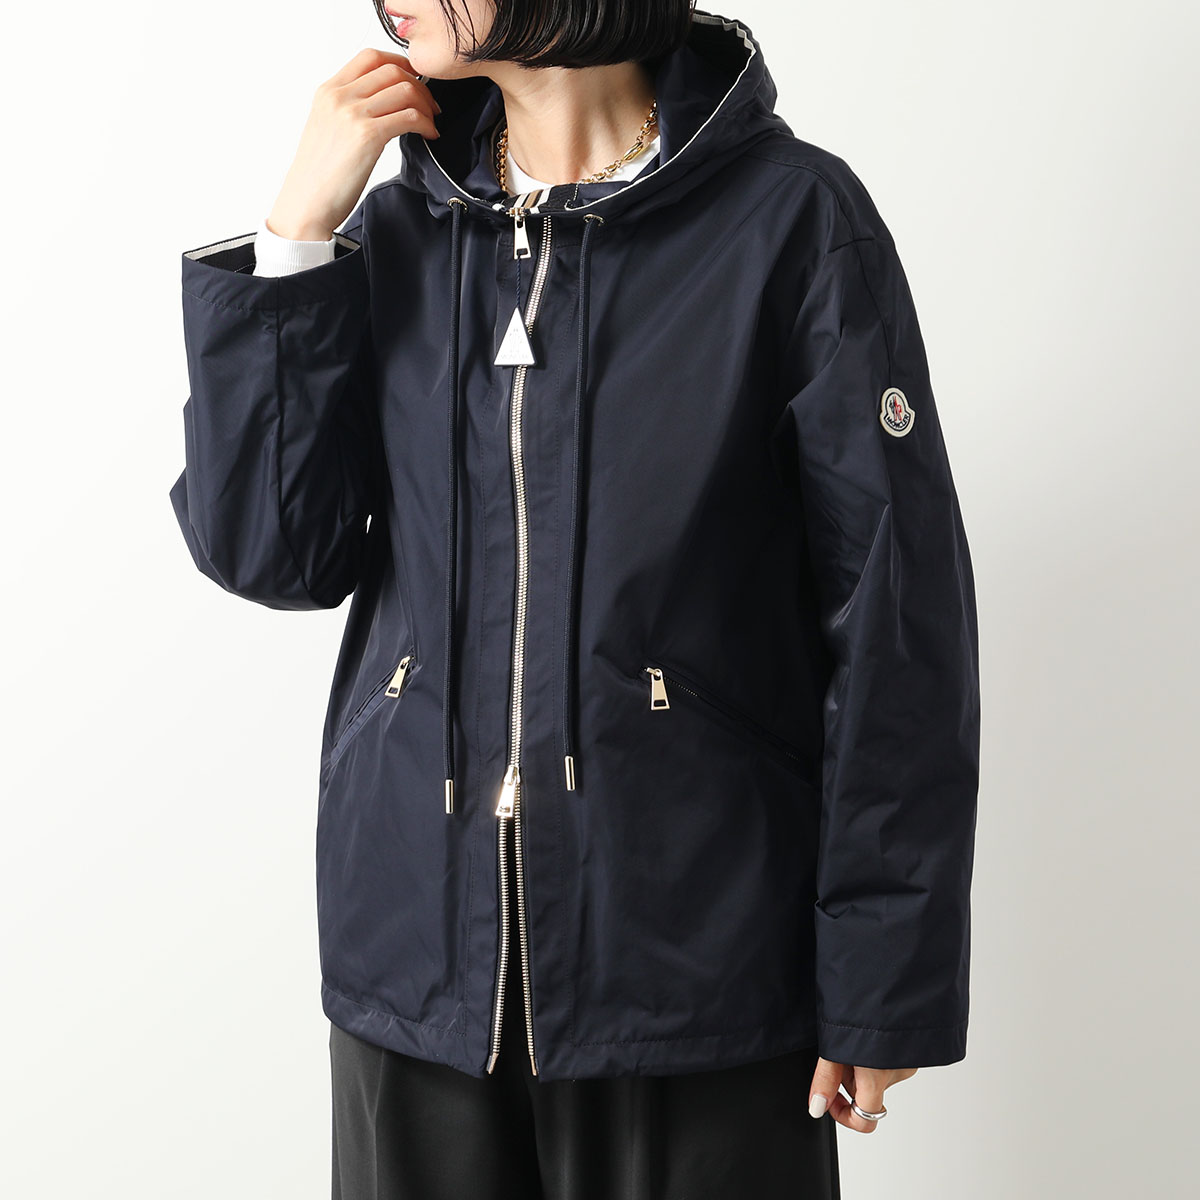 MONCLER モンクレール ジャケット CASSIOPEA カシオペア 1A00060 54A1K...